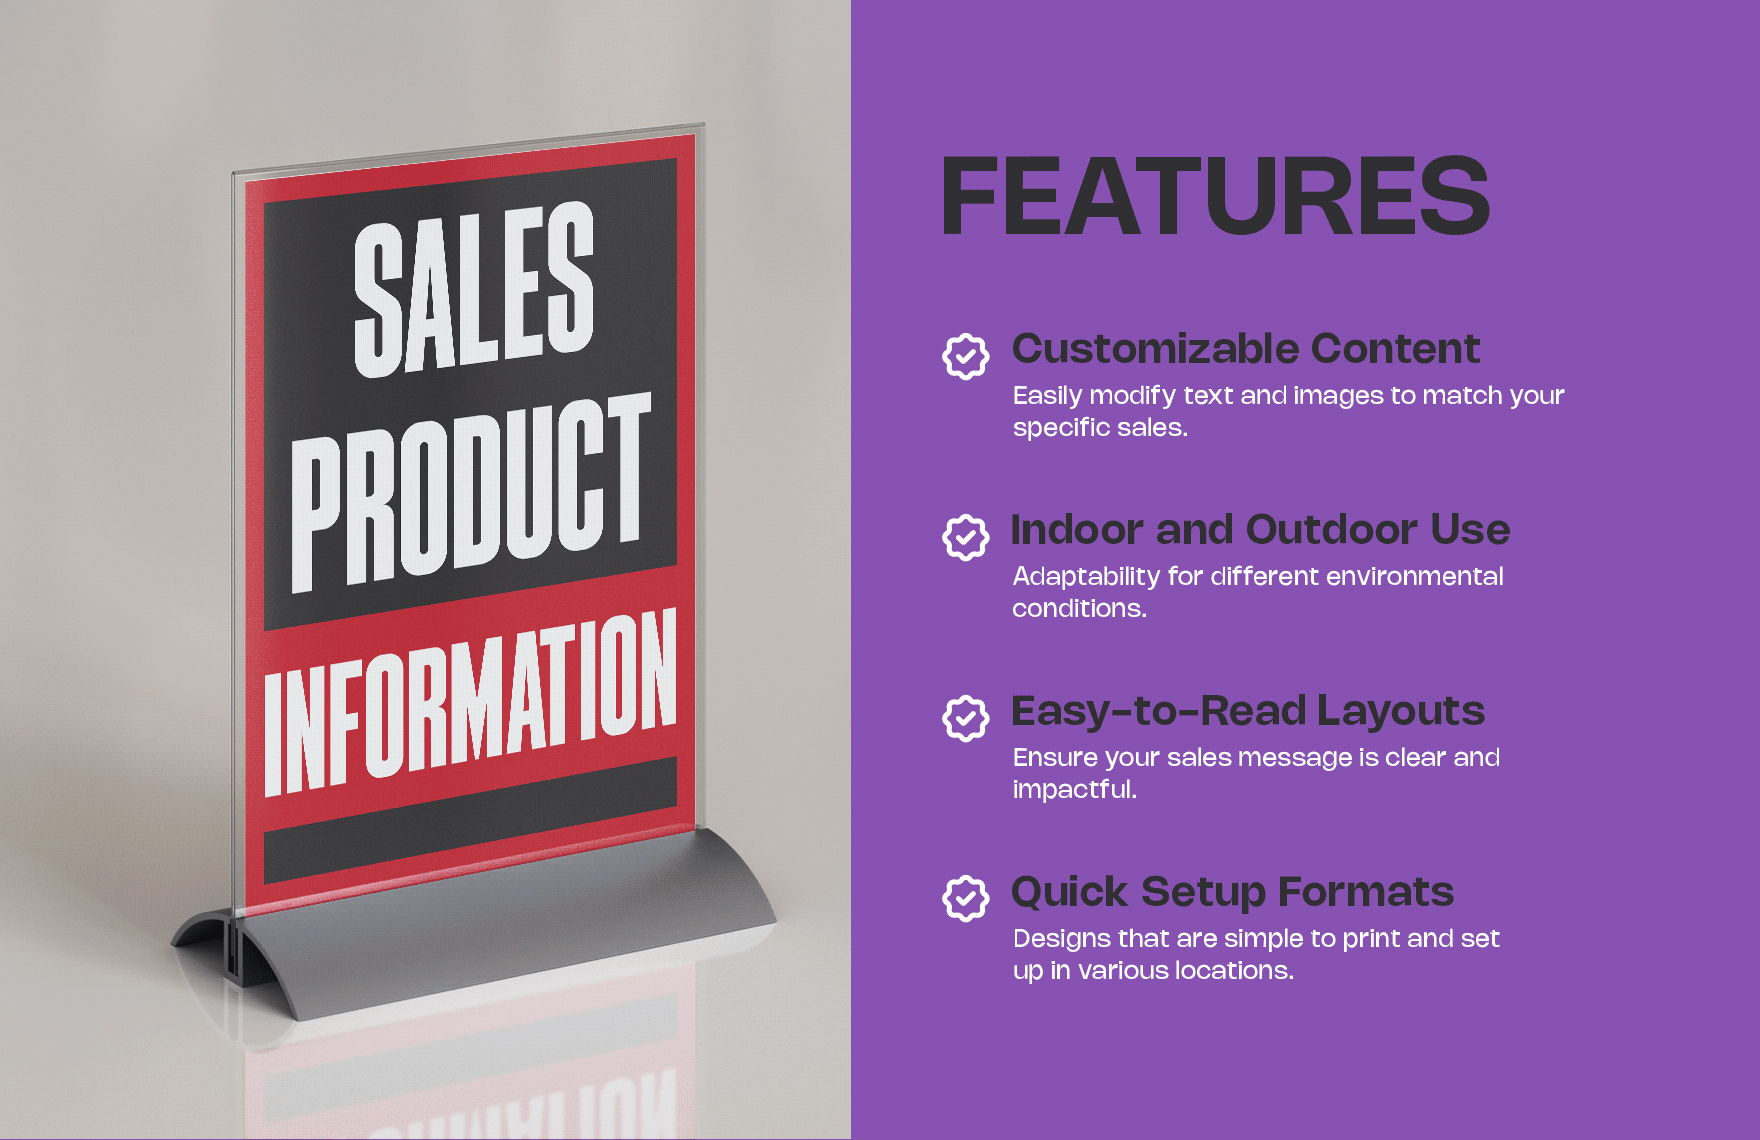 Sales Product Information Signage Template